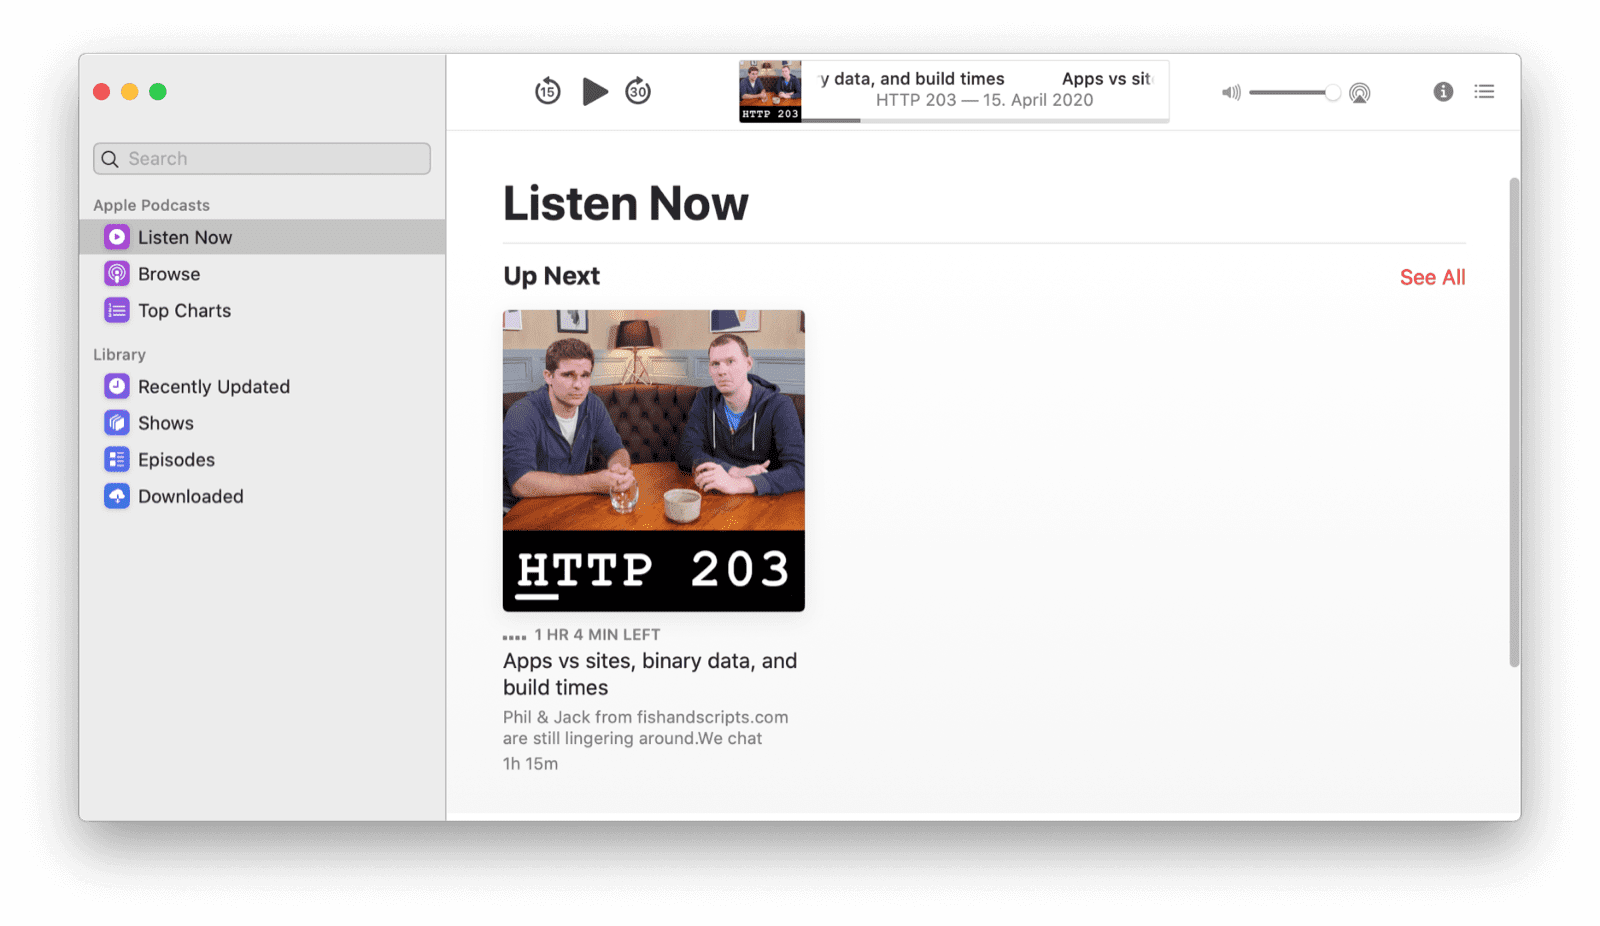 The Podcasts app in light mode.